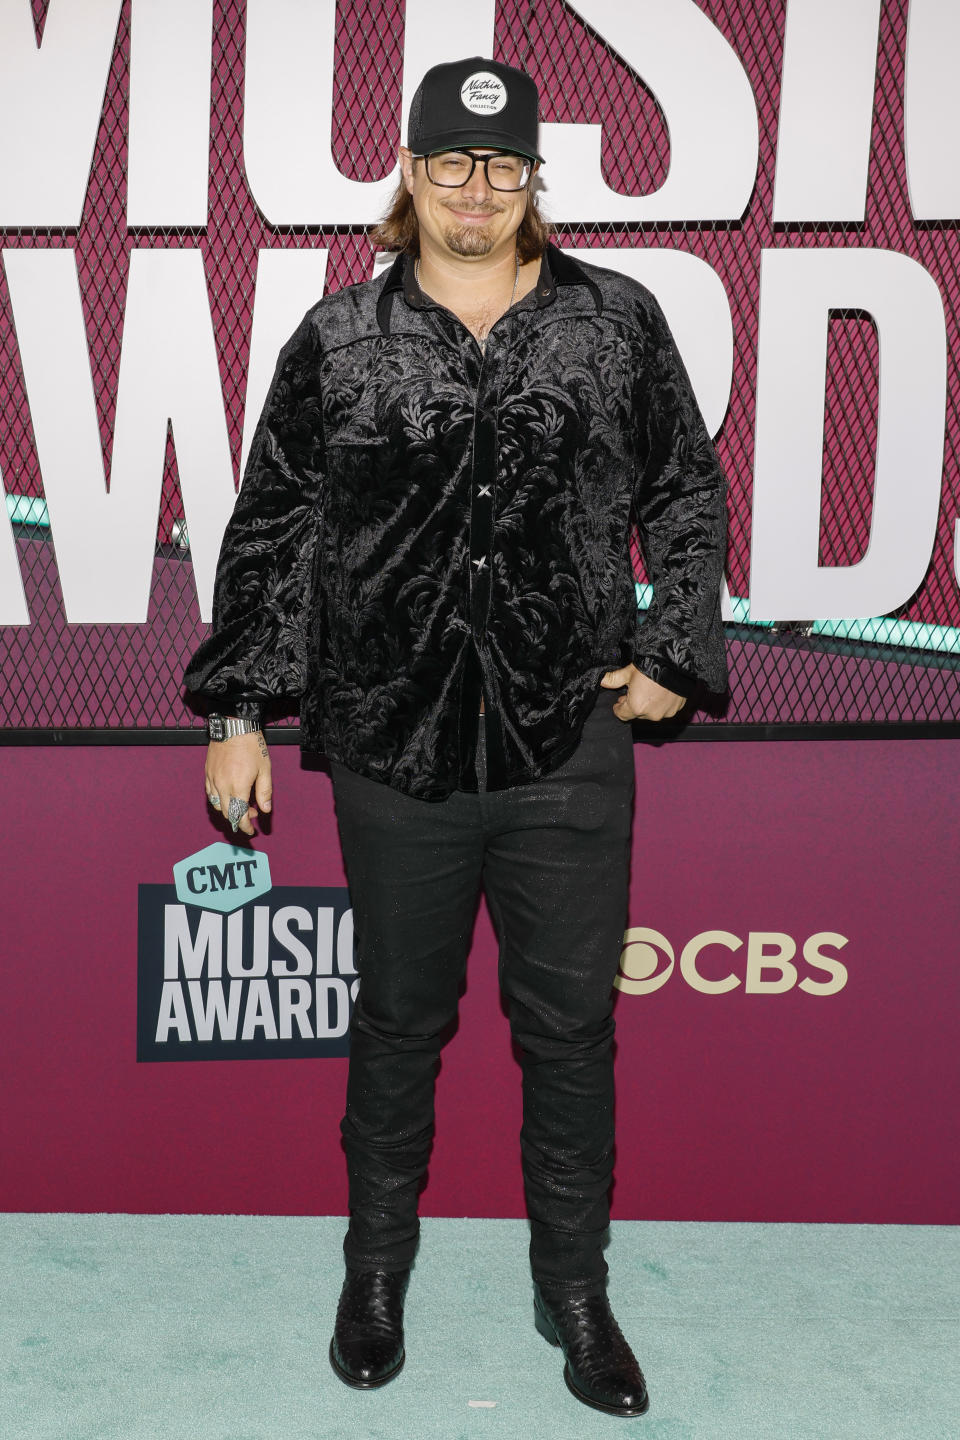 AUSTIN, TEXAS - APRIL 02: HARDY attends the 2023 CMT Music Awards at Moody Center on April 02, 2023 in Austin, Texas. (Photo by Jason Kempin/Getty Images)